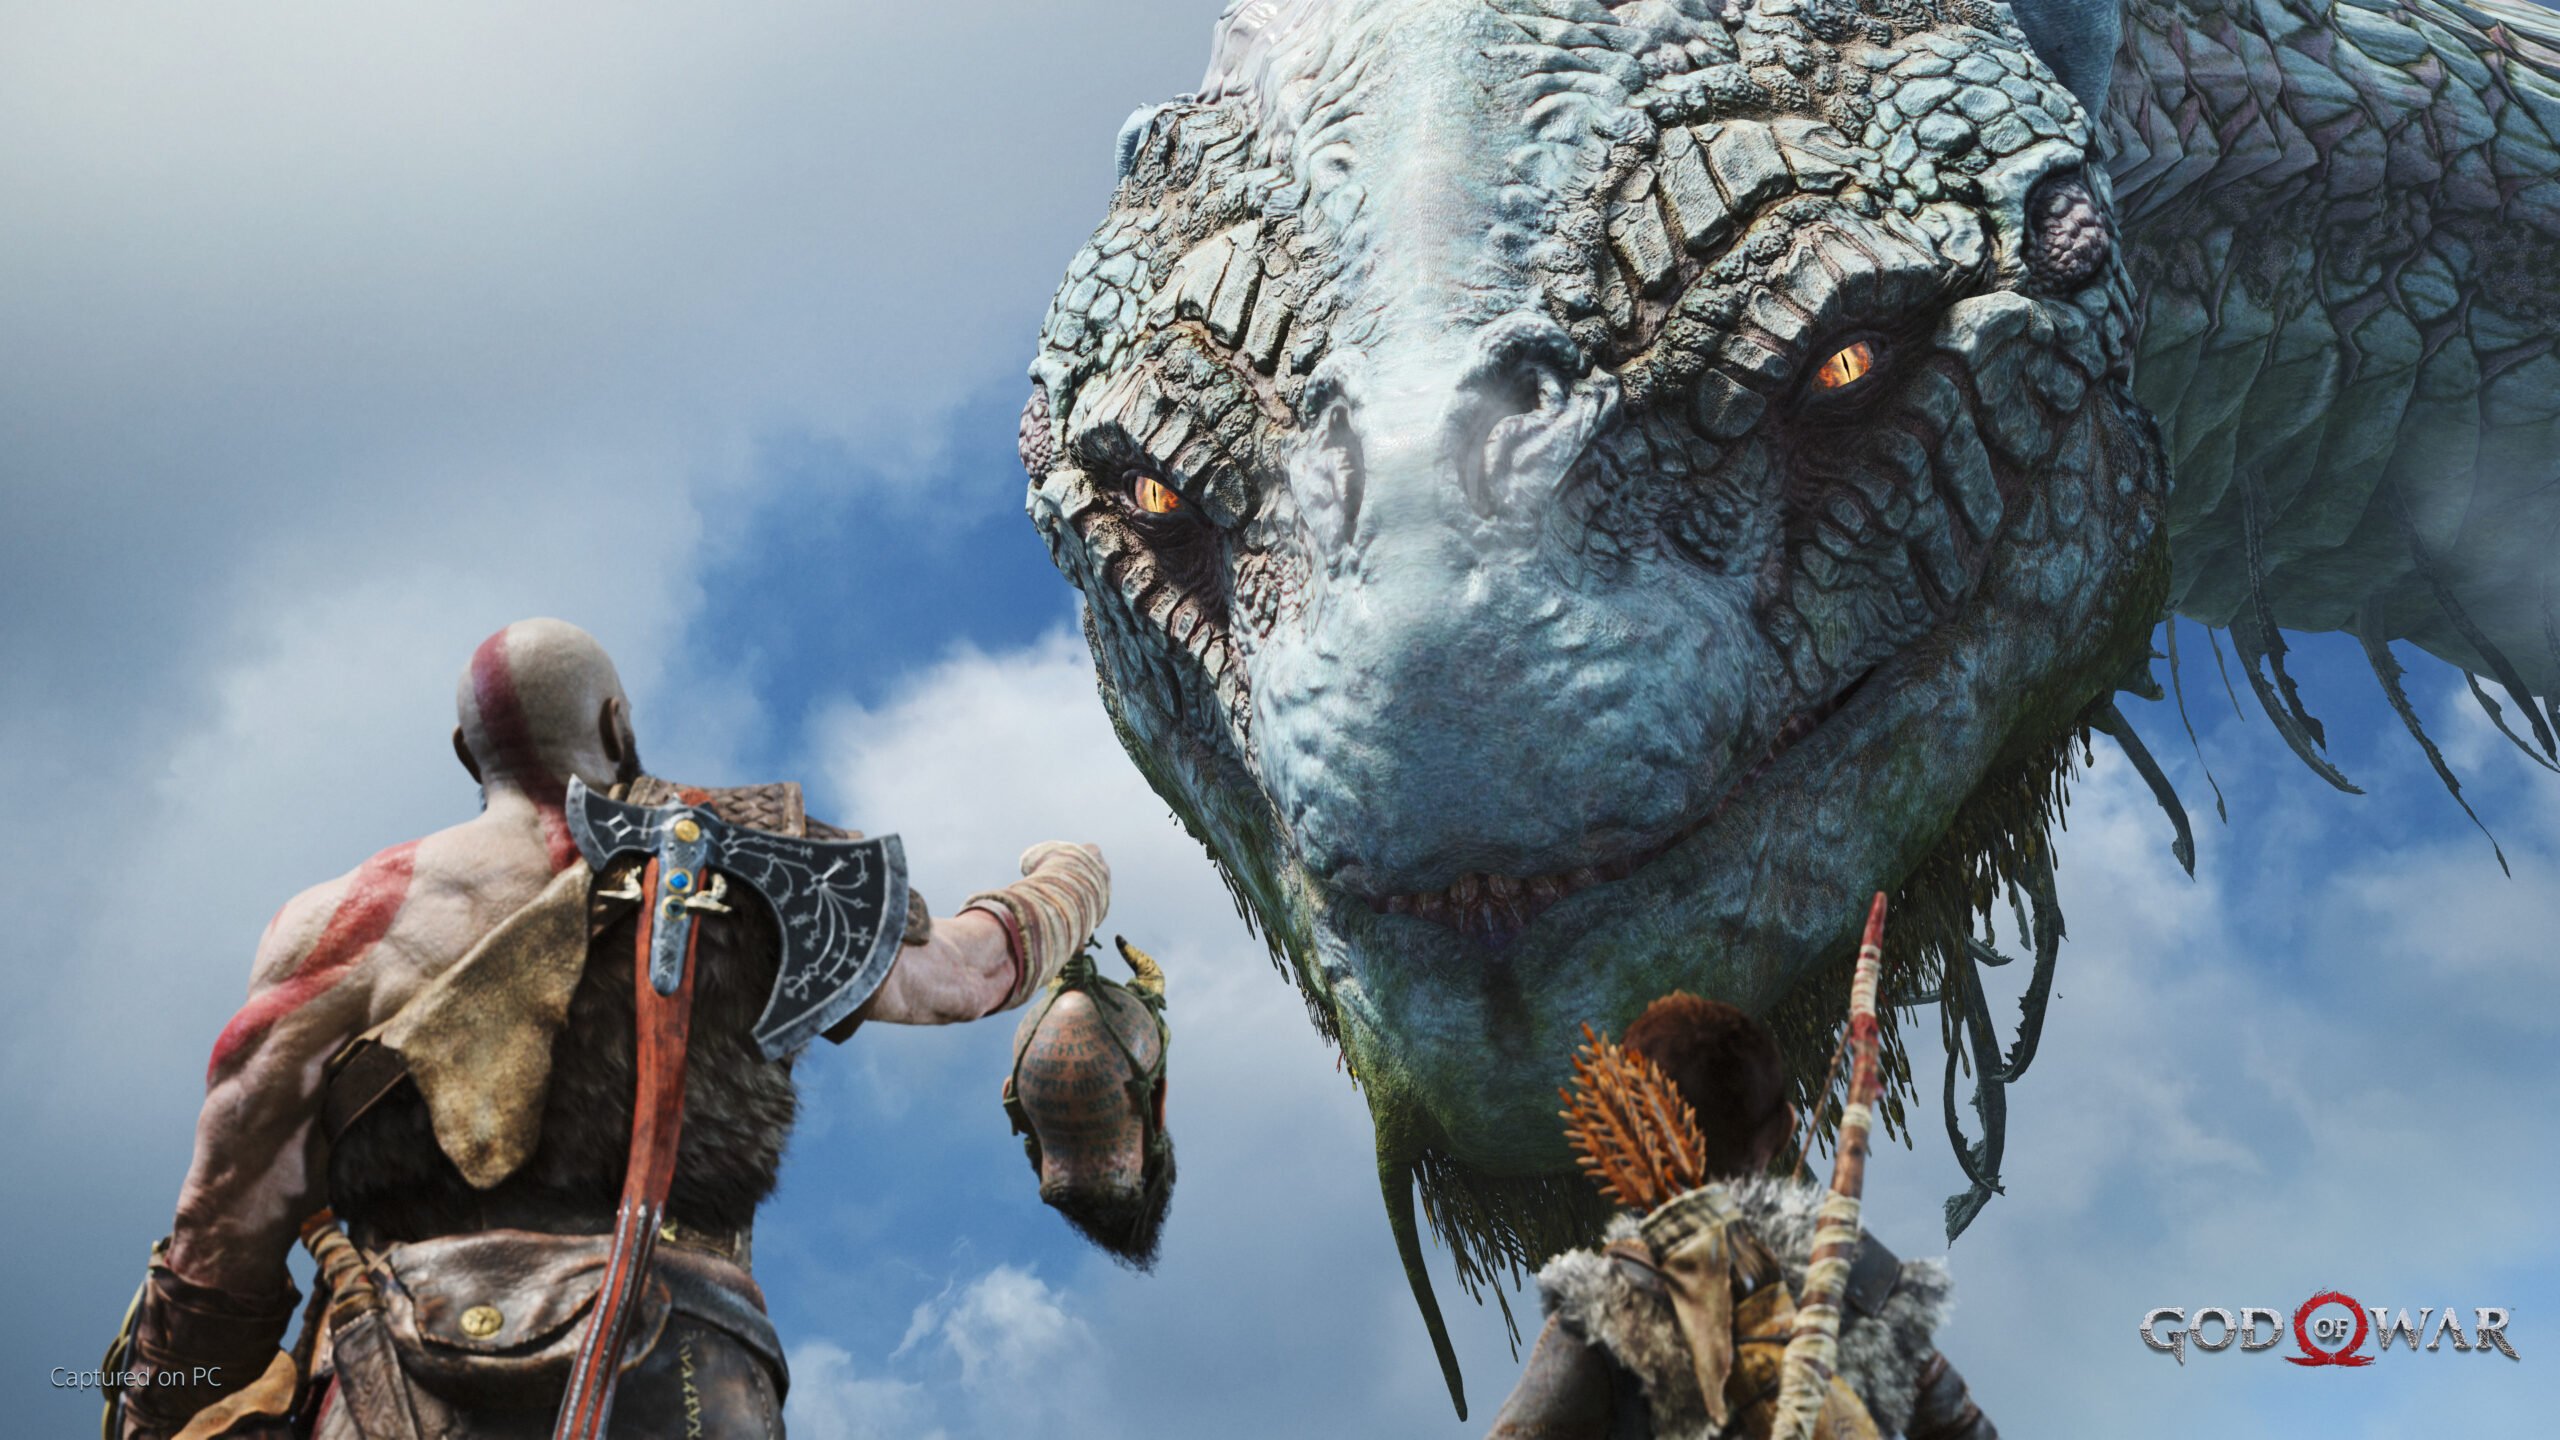 God of War’s director says PlayStation developers badgered Sony to bring their games to PC